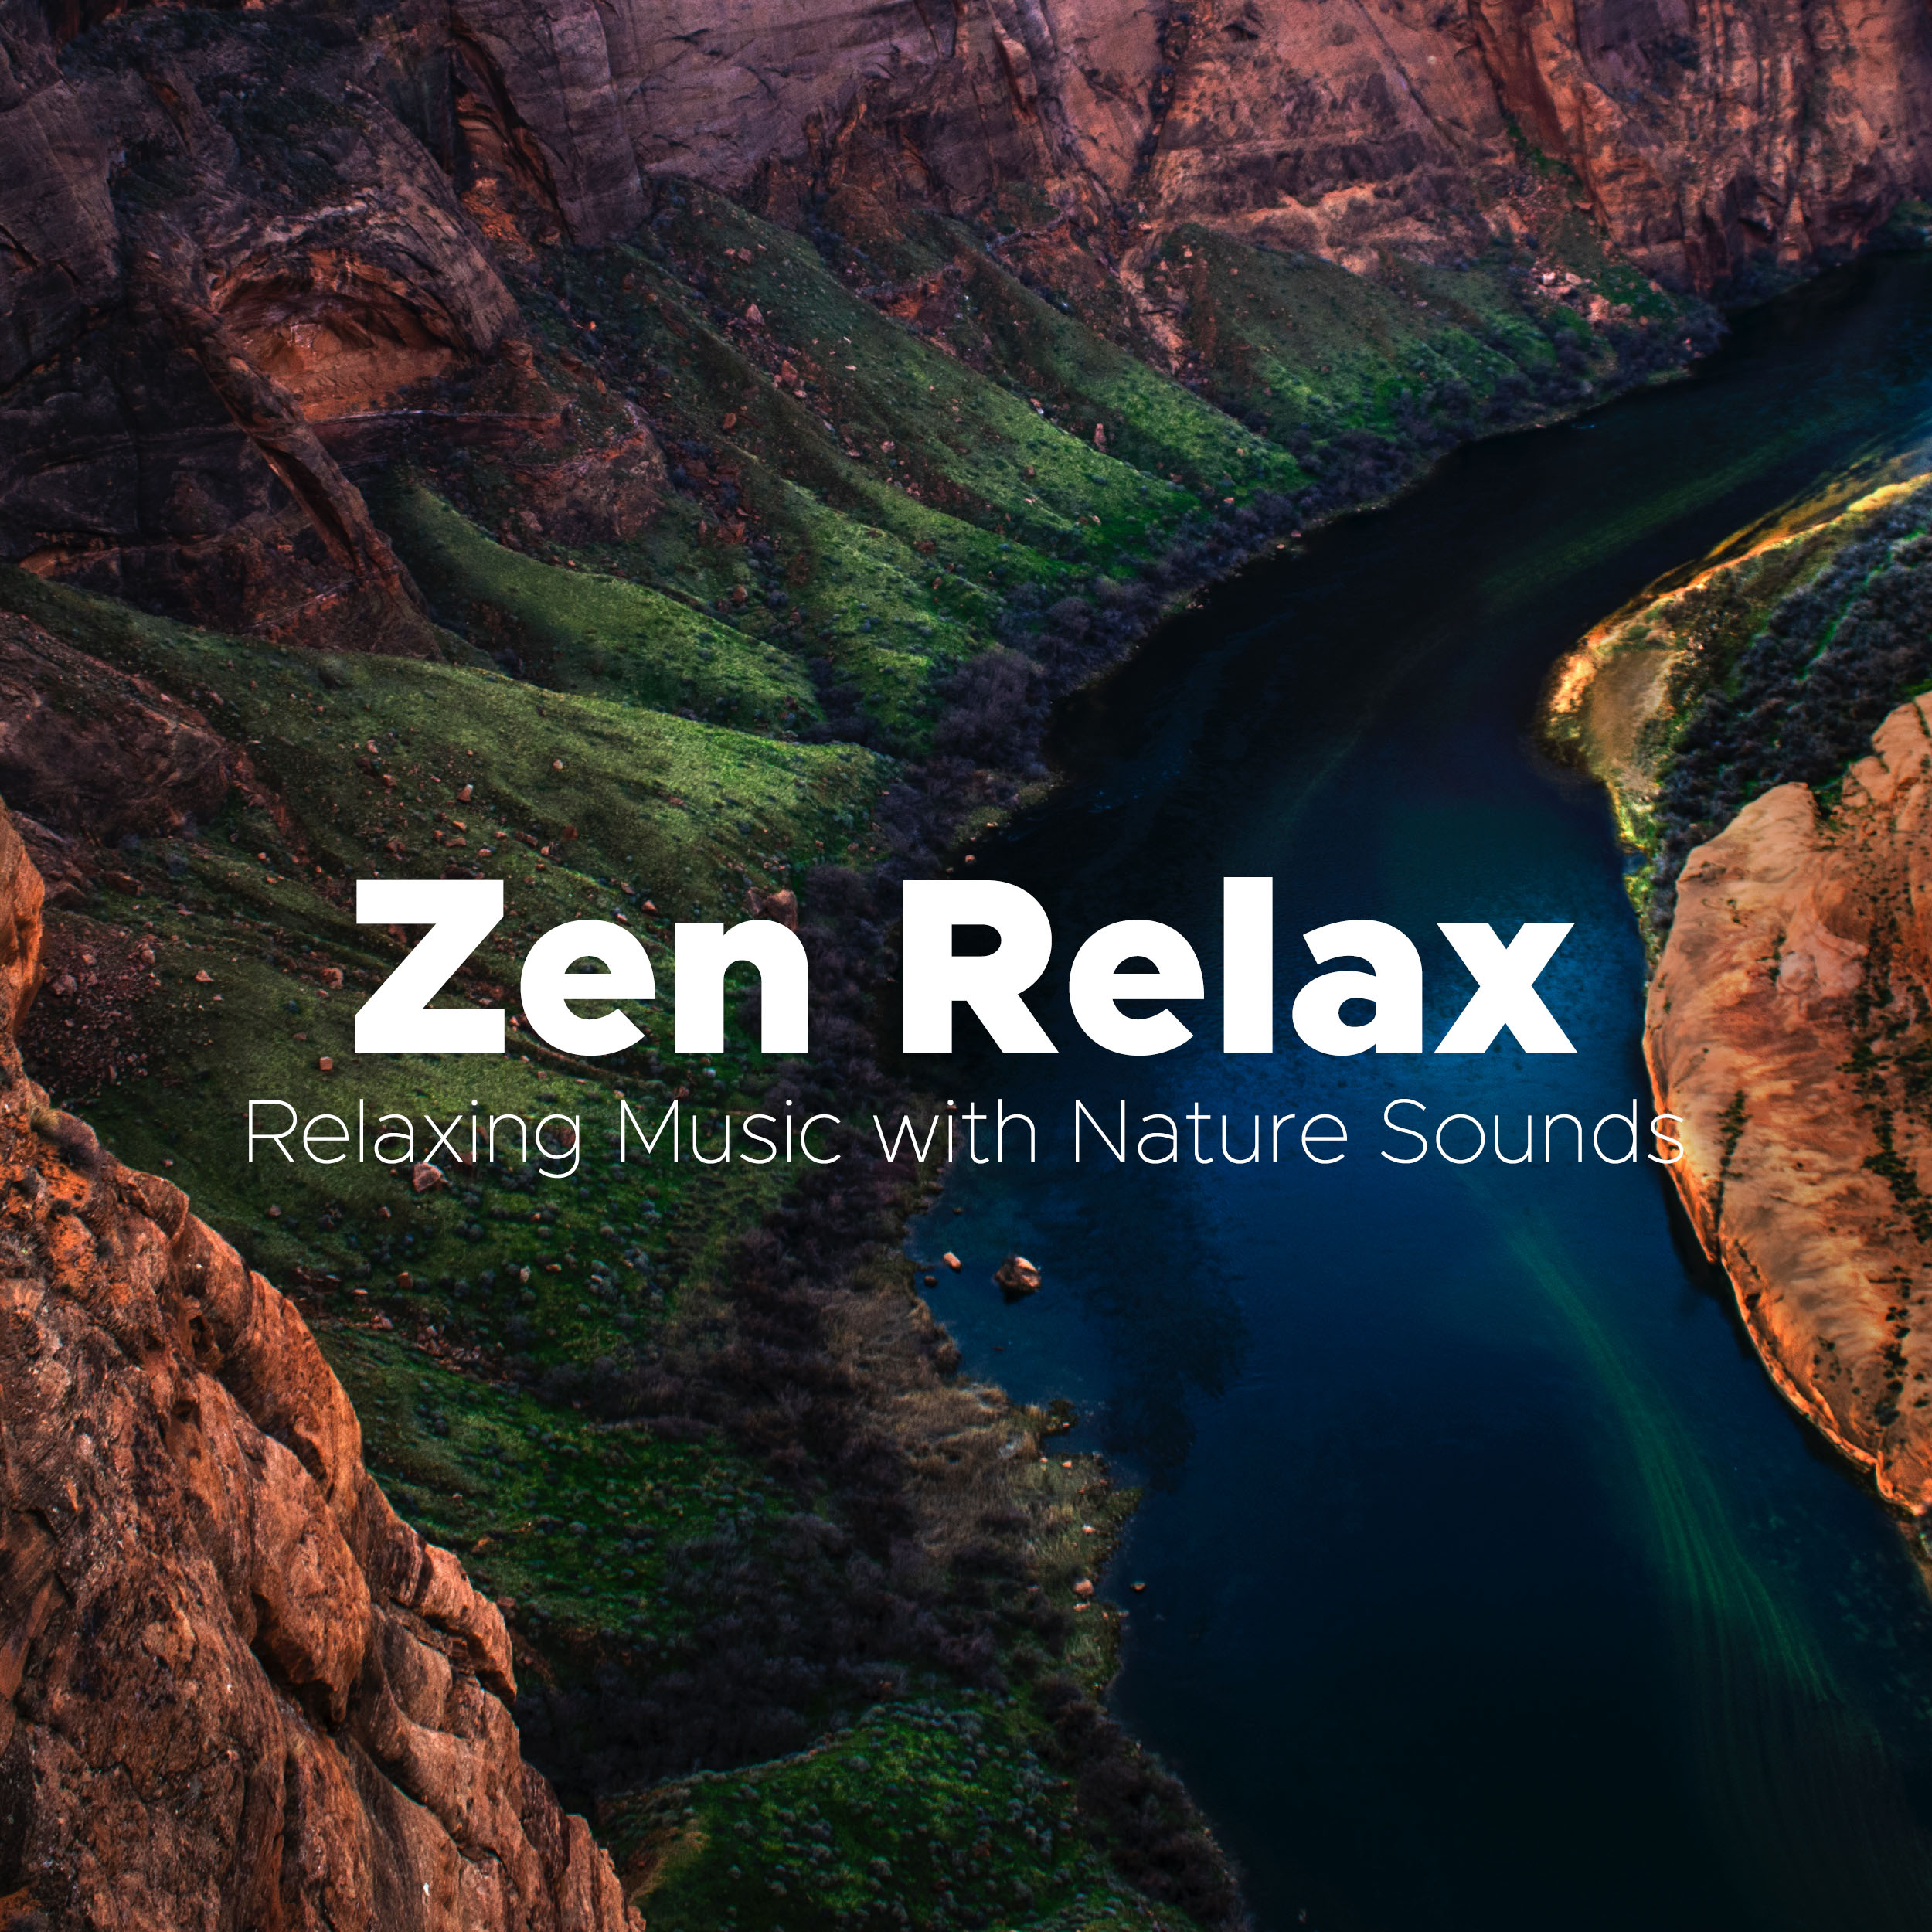 Zen Relax - The Perfect Audio Backdrop to an Evening Spent with your Lover. Relaxing Music with Nature Sounds